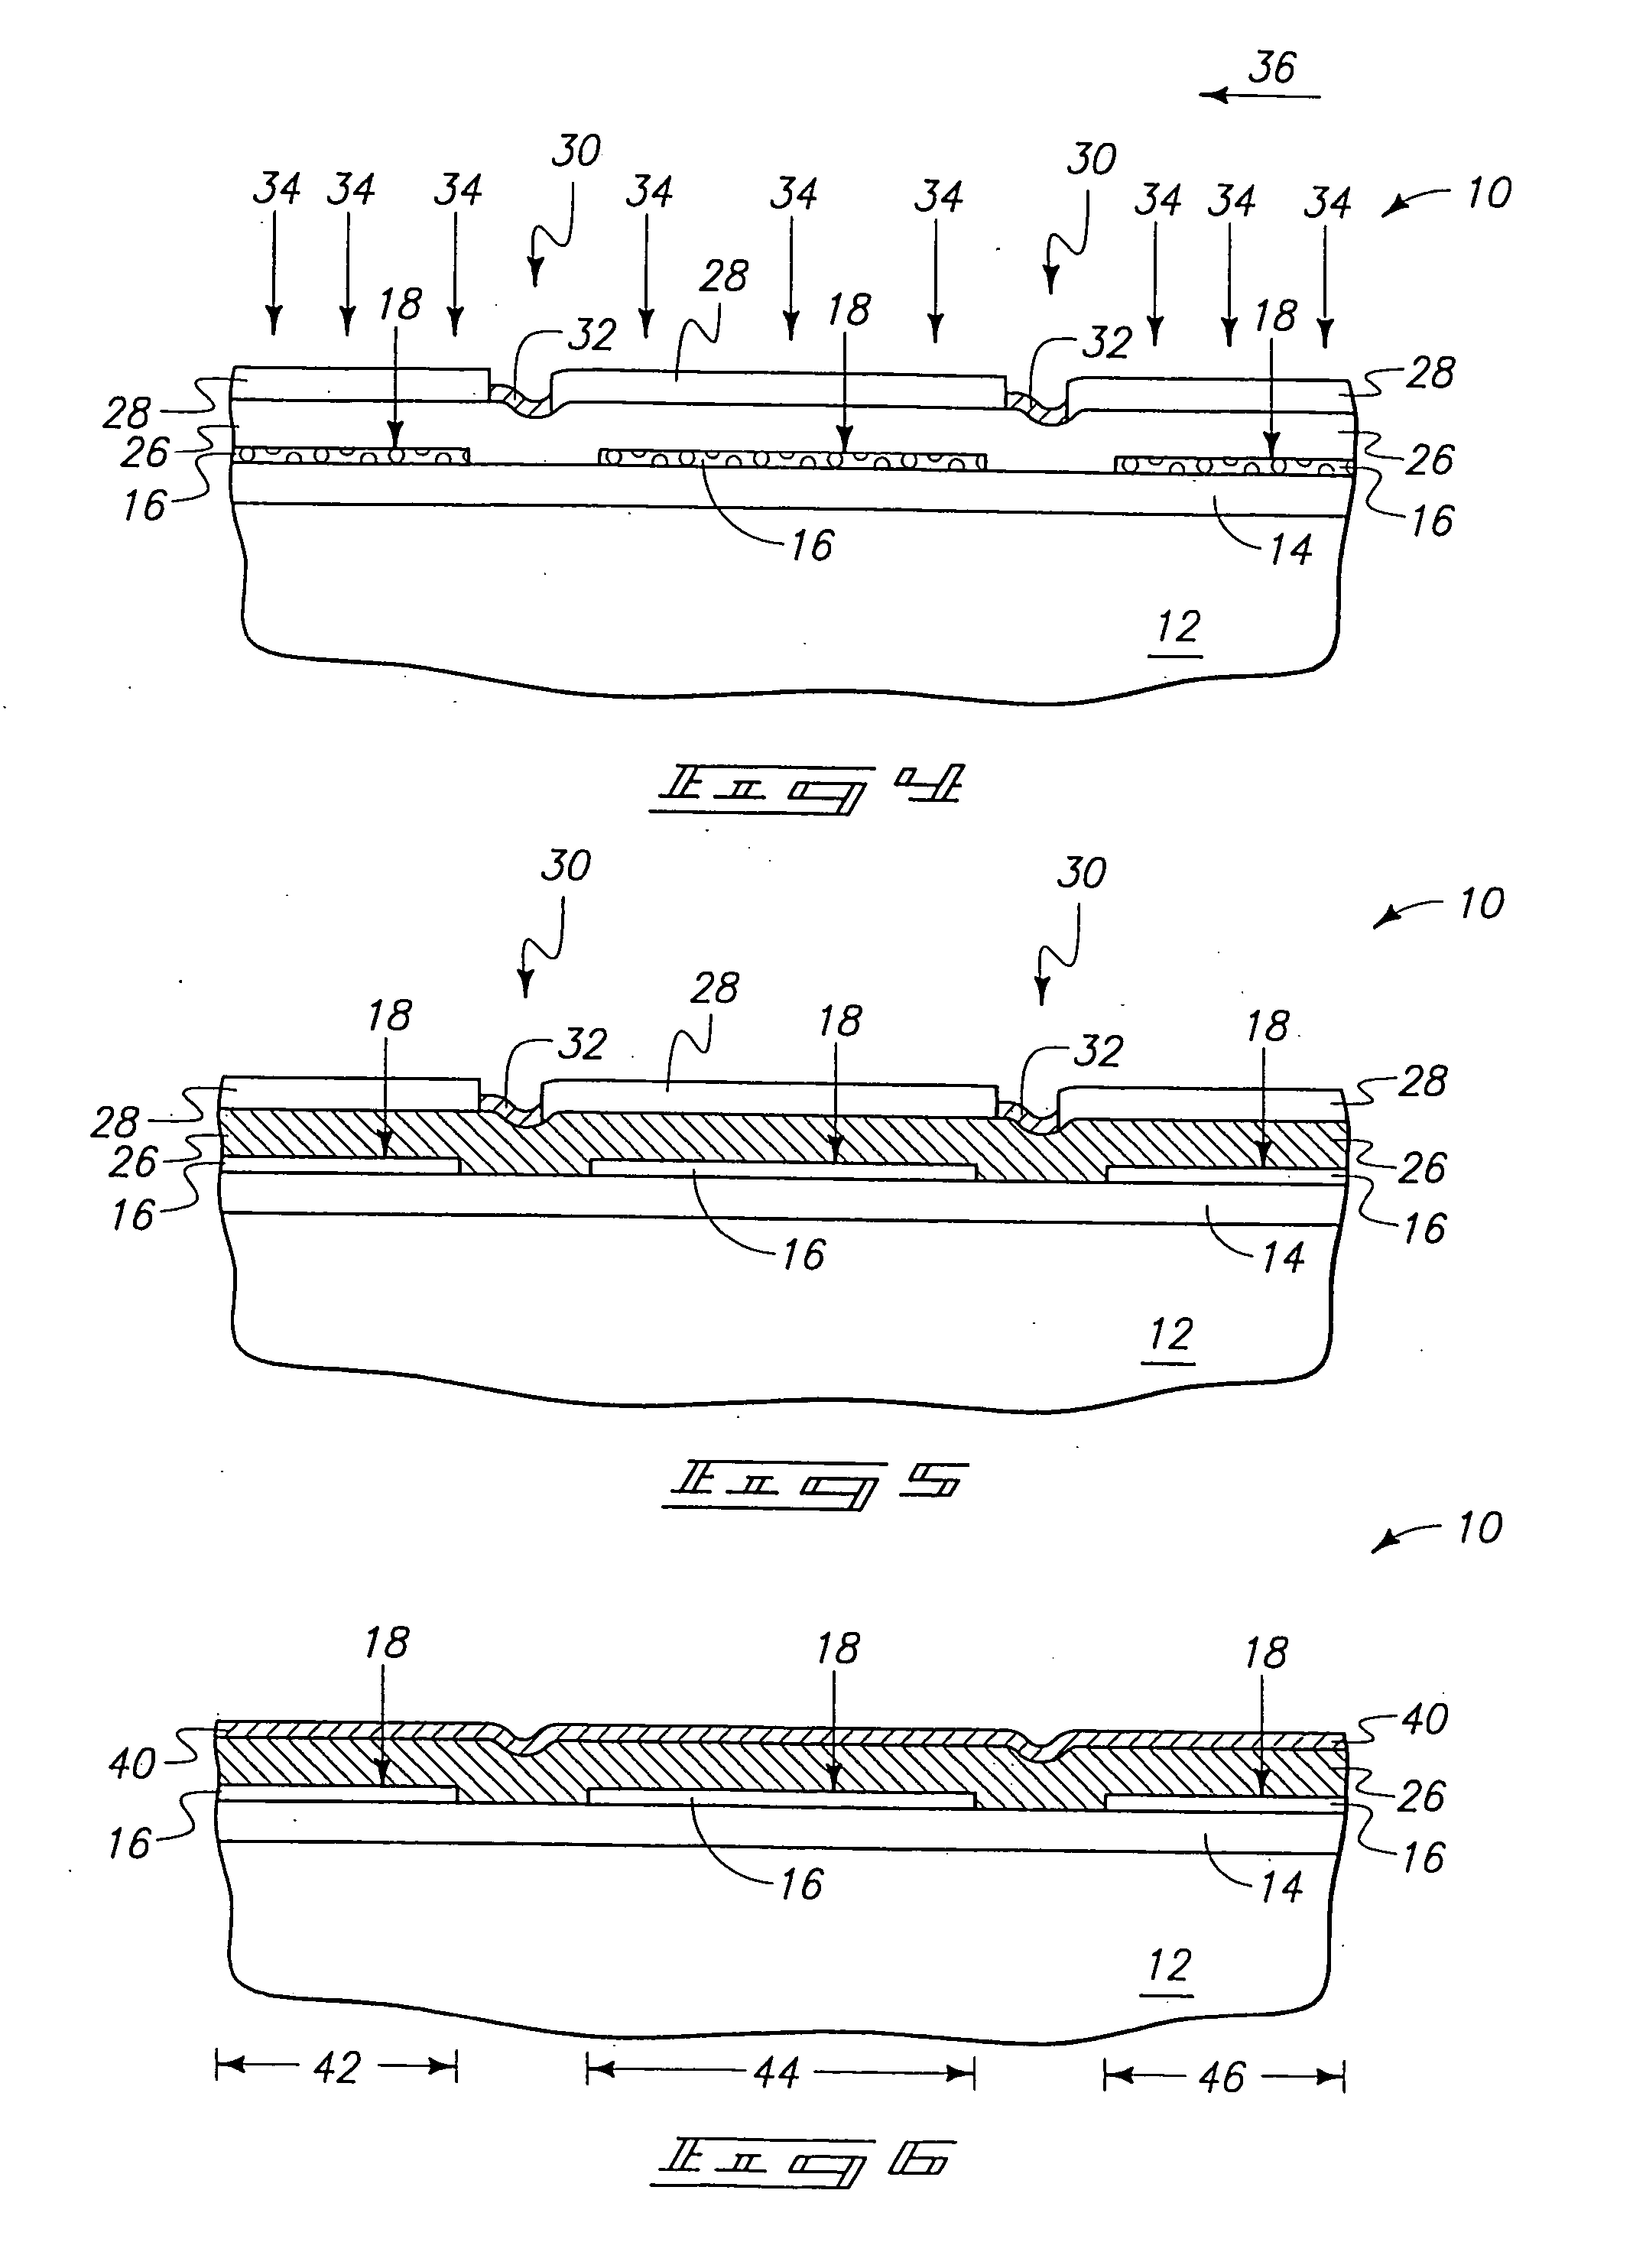 Methods of forming semiconductor constructions and integrated circuits